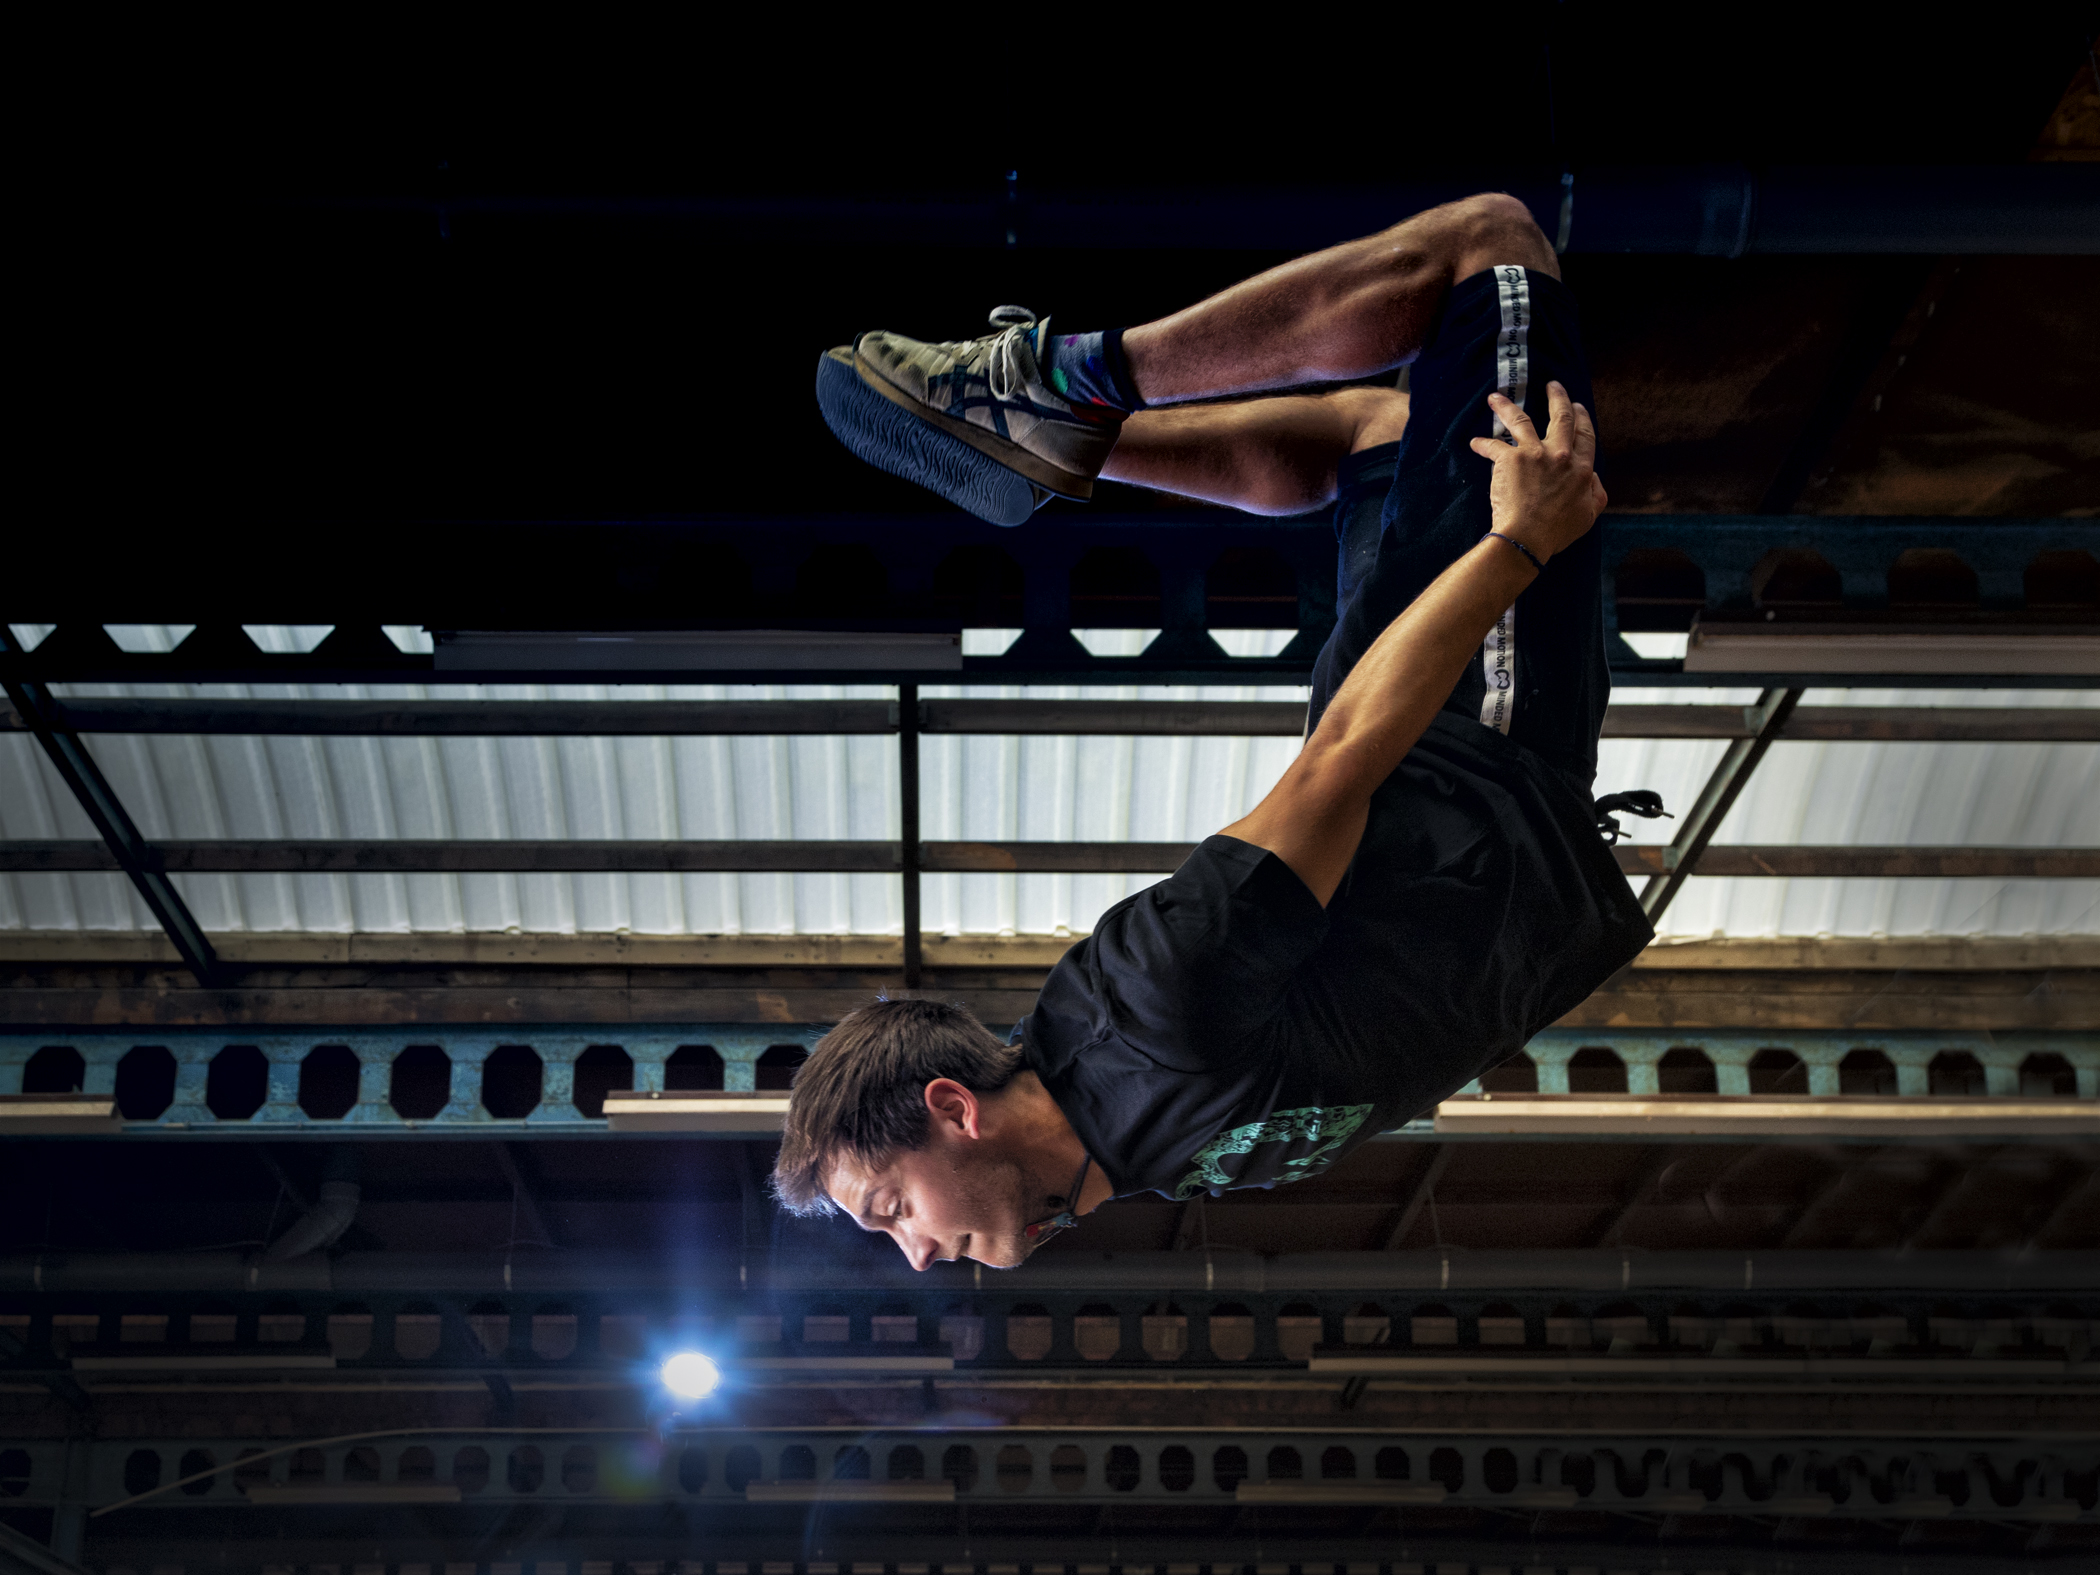 This is how you can learn new freerunning tricks!